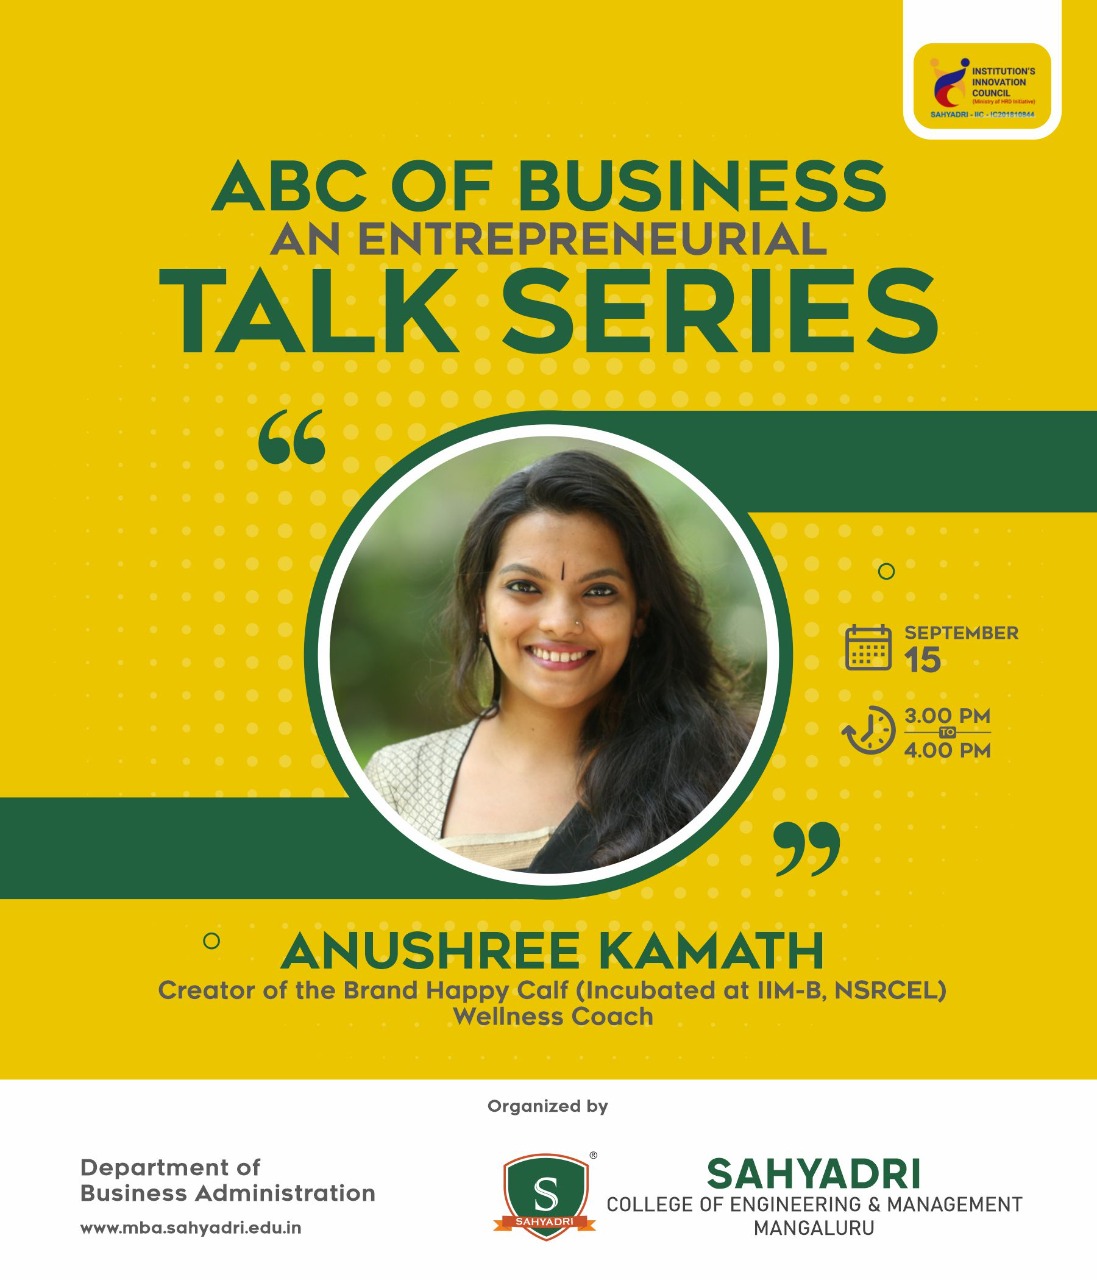 ABC of Business, an Entrepreneurial Talk series - Episode 2